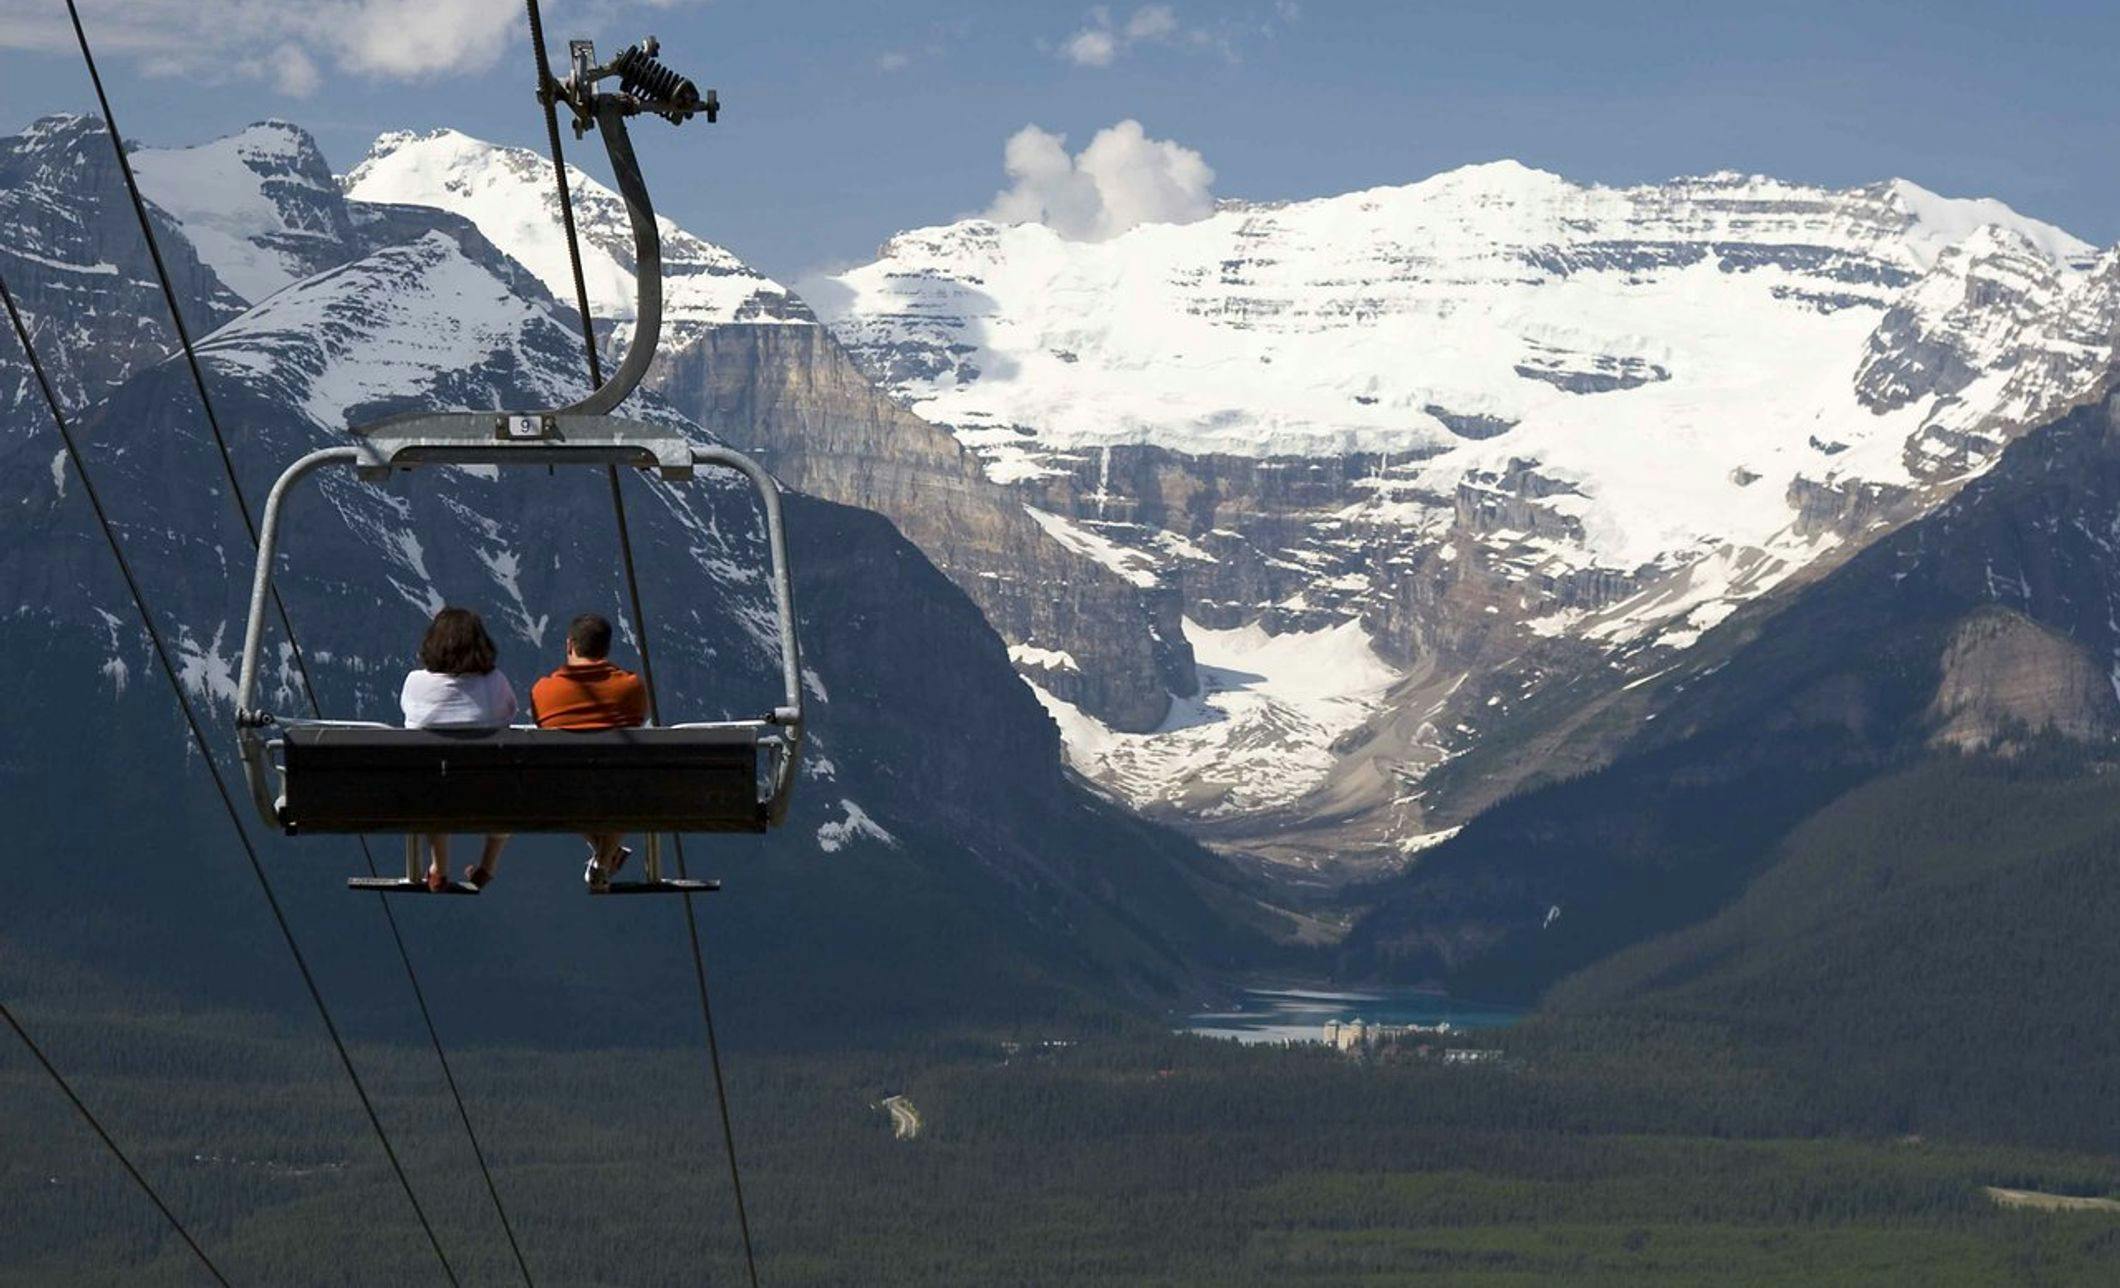 The Lake Louise Sightseeing Summer Gondola in Banff National Park in the Canadian Rockies.